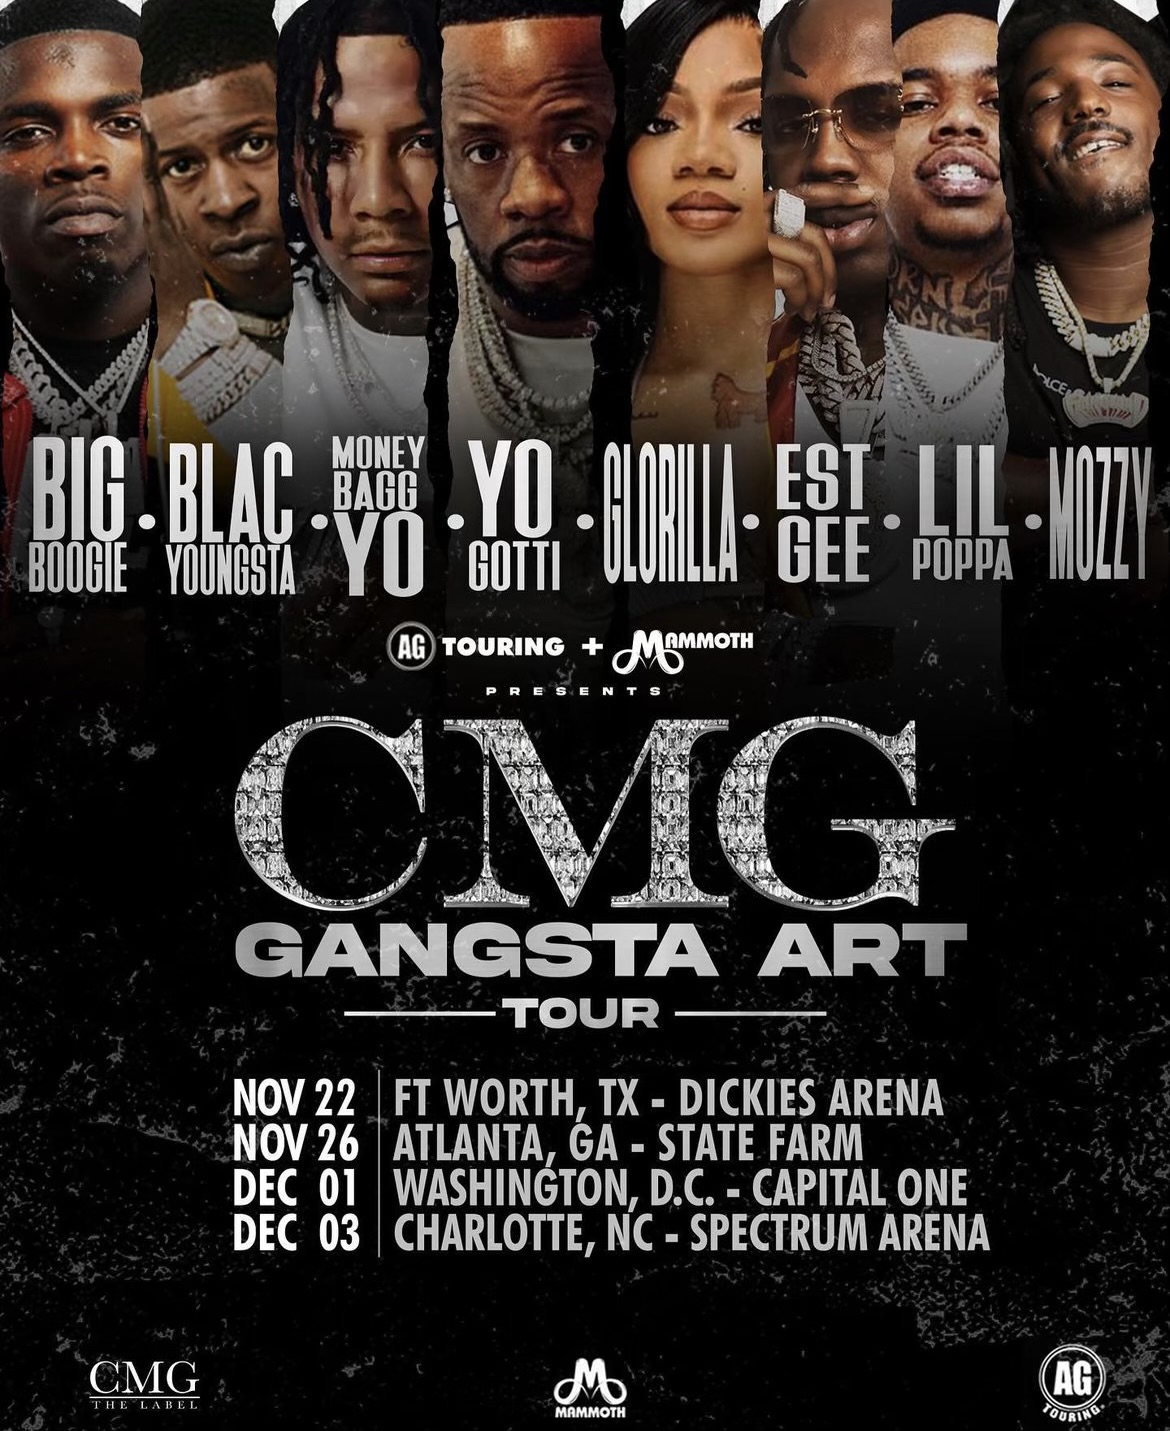 CMG Presents The Gangsta Art Tour Exclusive Access